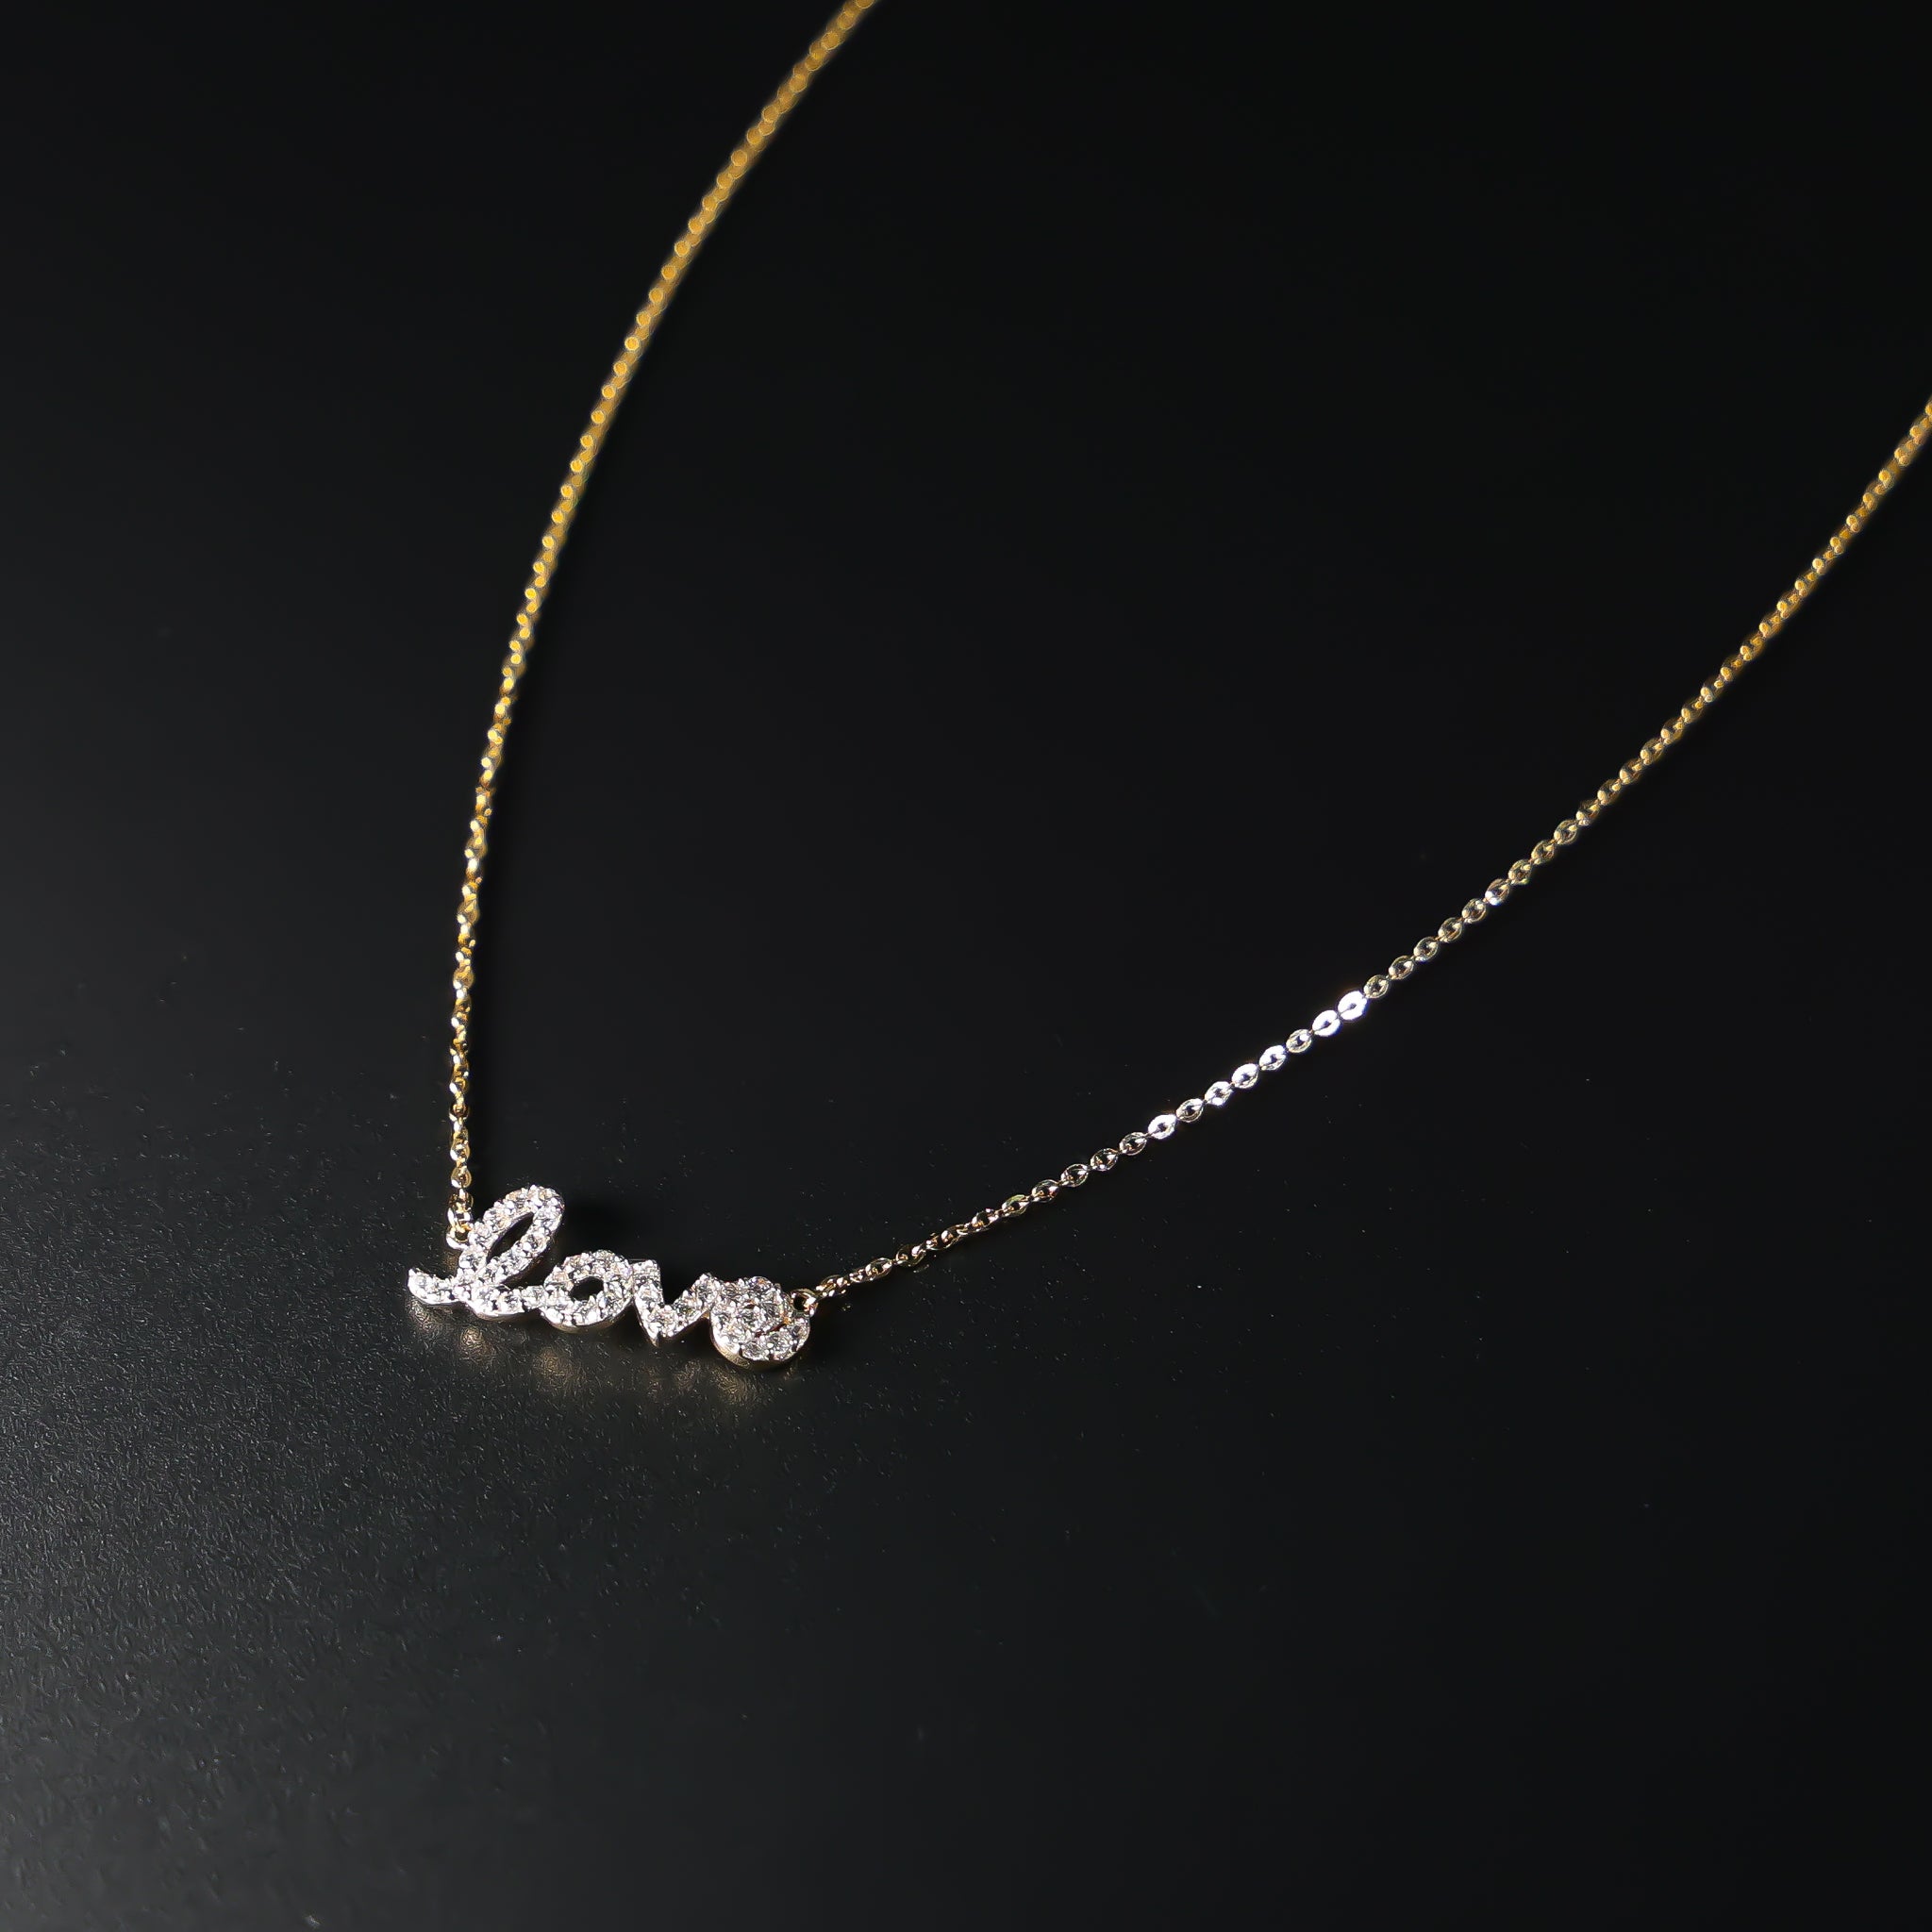 14K Dainty Gold Love Necklace Model-NK0216 - Charlie & Co. Jewelry